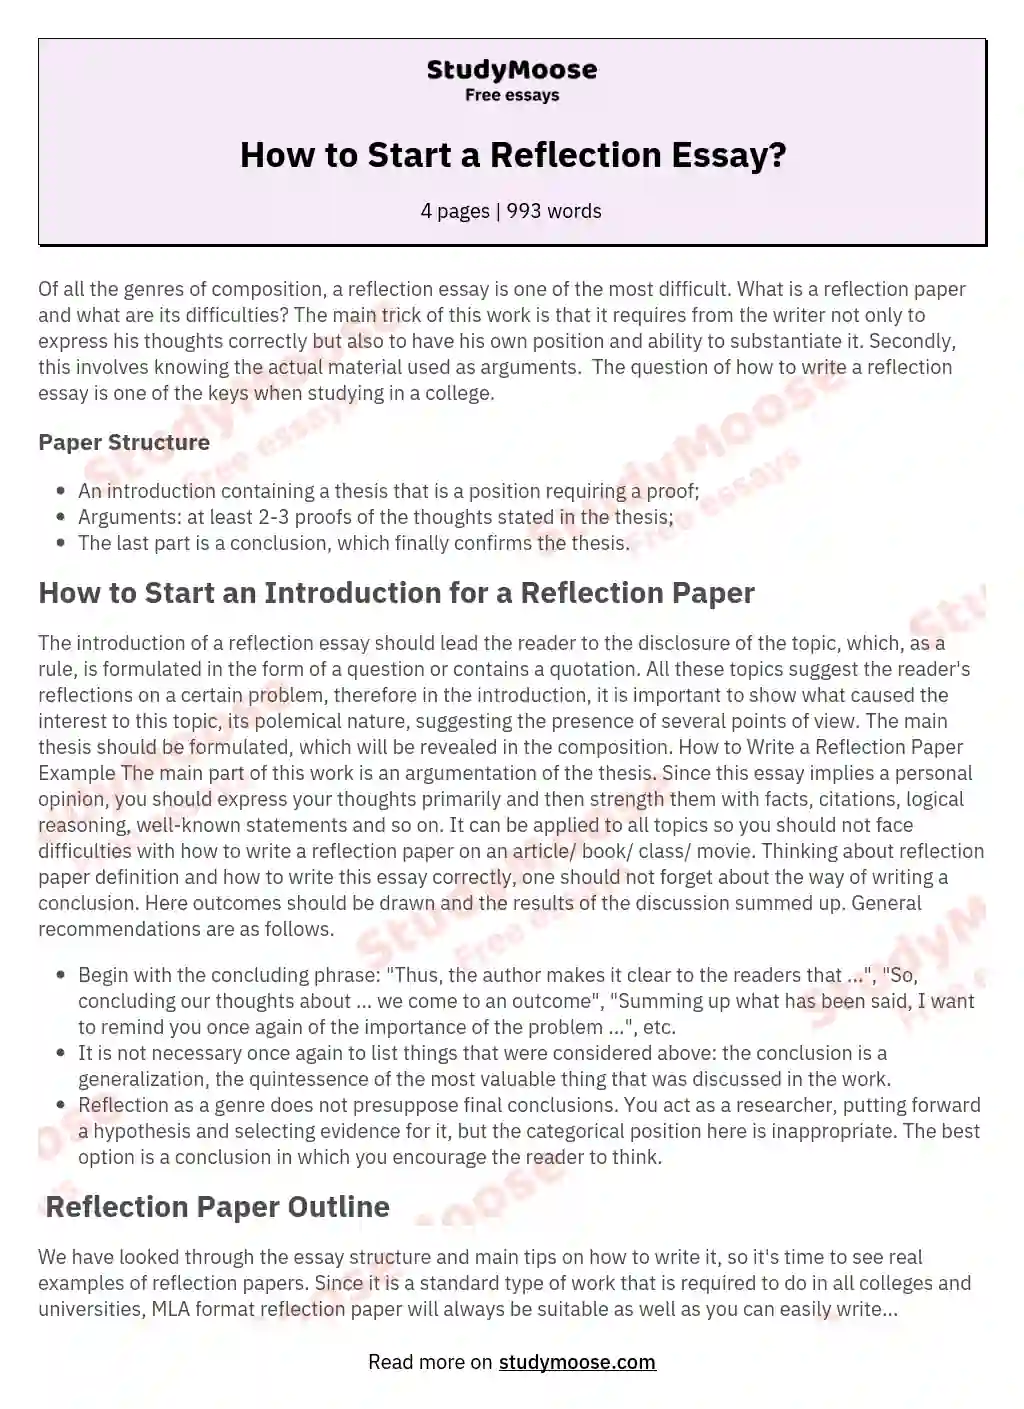 How to Start a Reflection Essay? essay